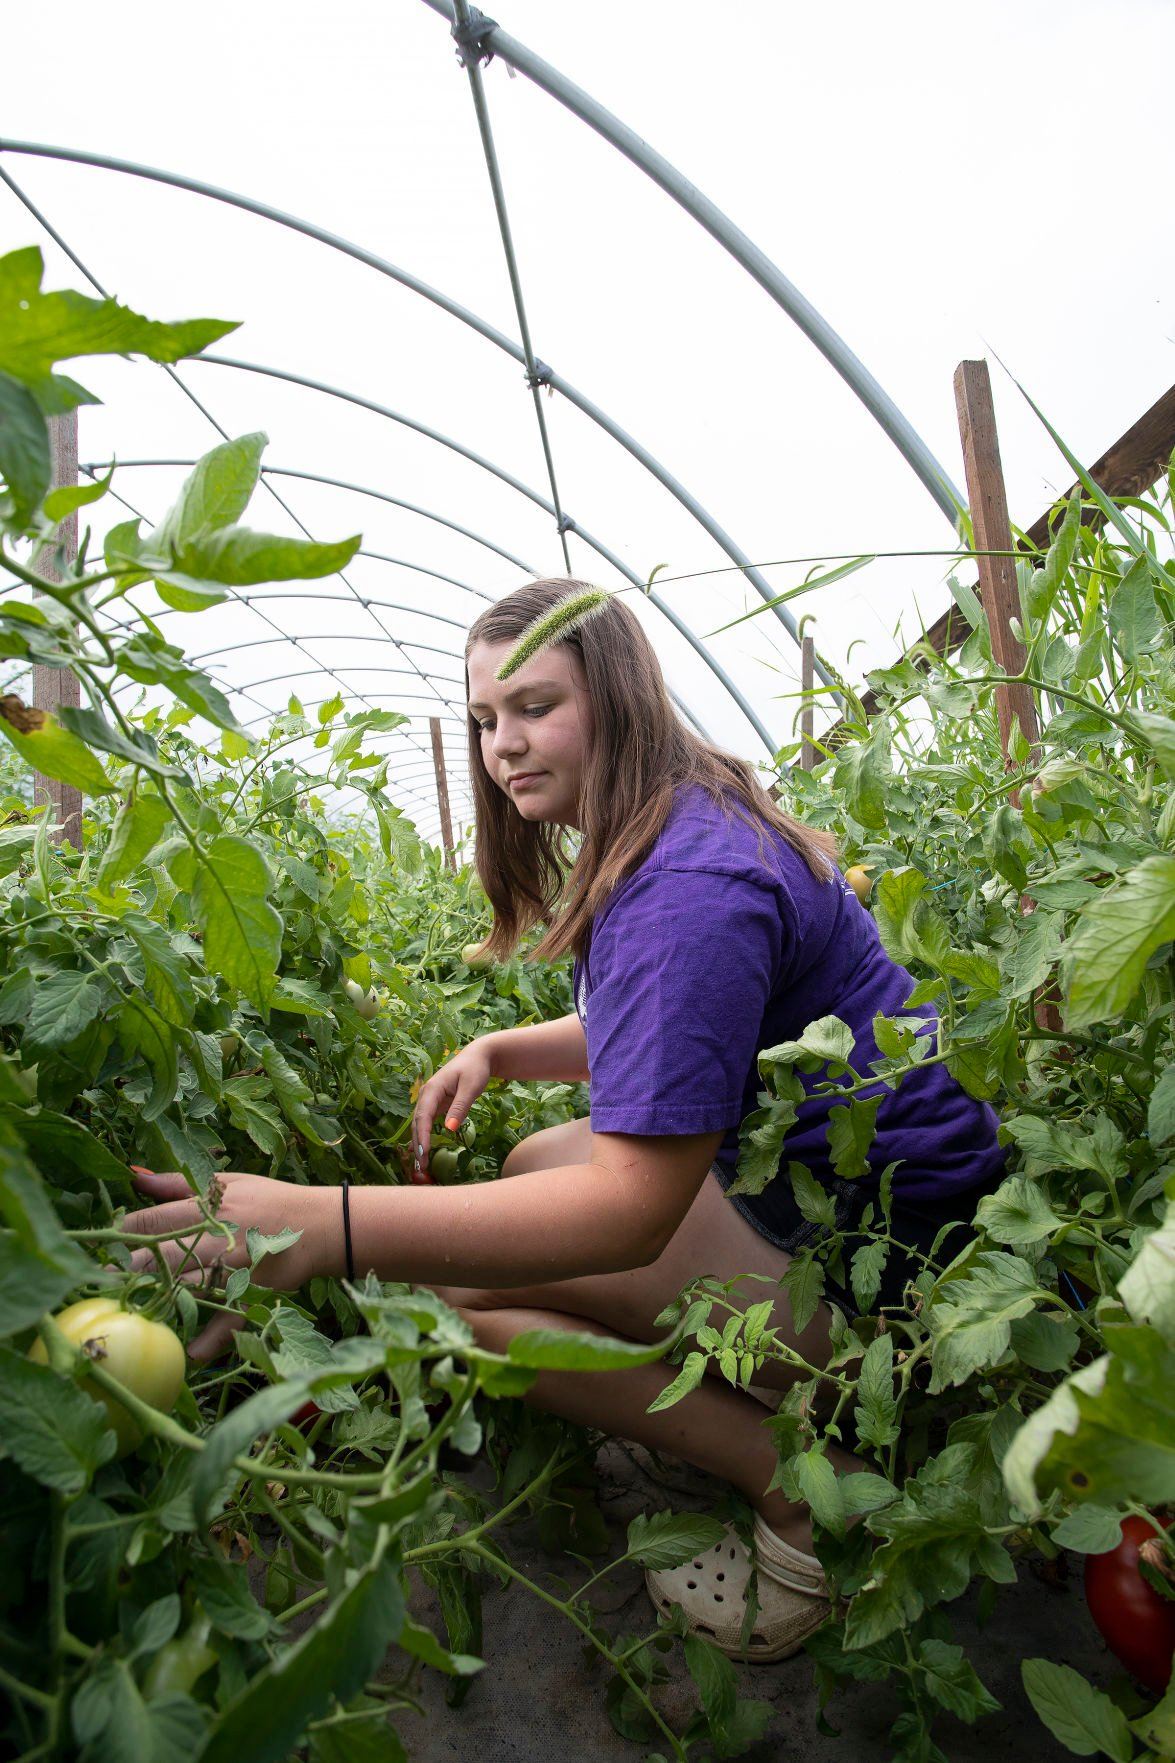 Shelby Knoble, 17, of Fennimore, inspects tomatoes on her grandparents’ farm in rural Lancaster.    PHOTO CREDIT: Stephen Gassman